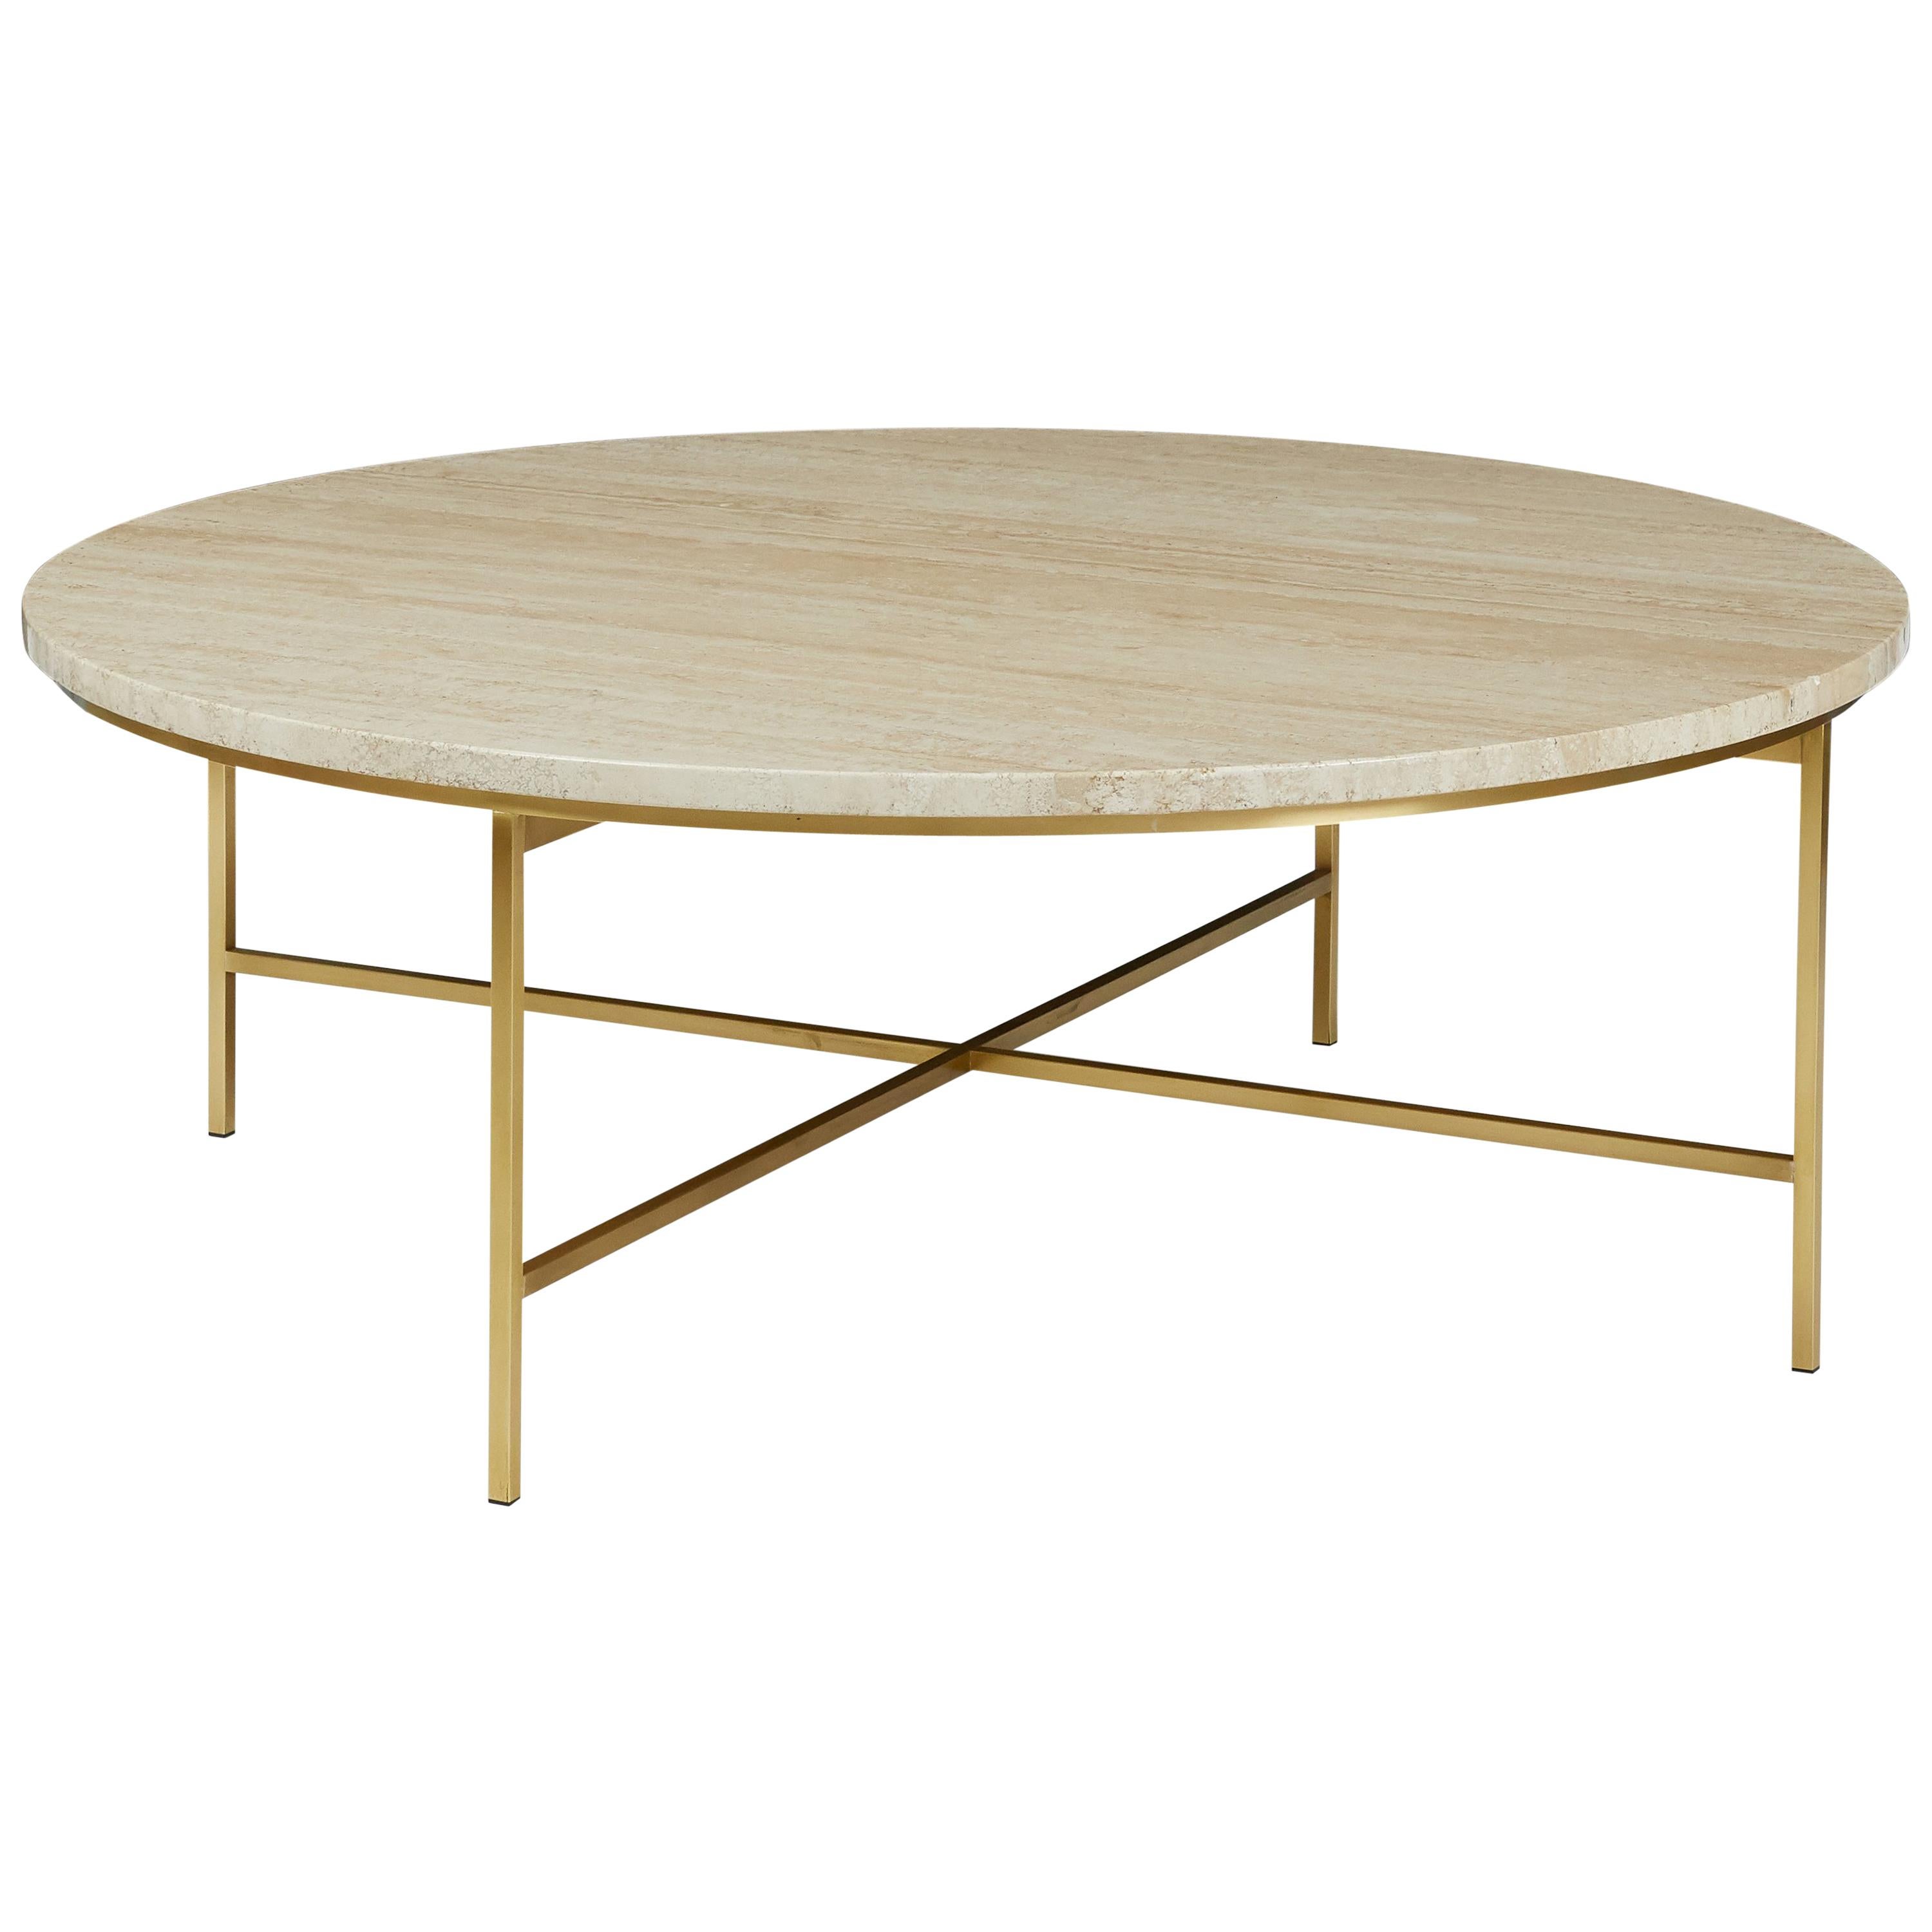 Brass and Travertine Round Coffee Table by Paul McCobb for Calvin Furniture